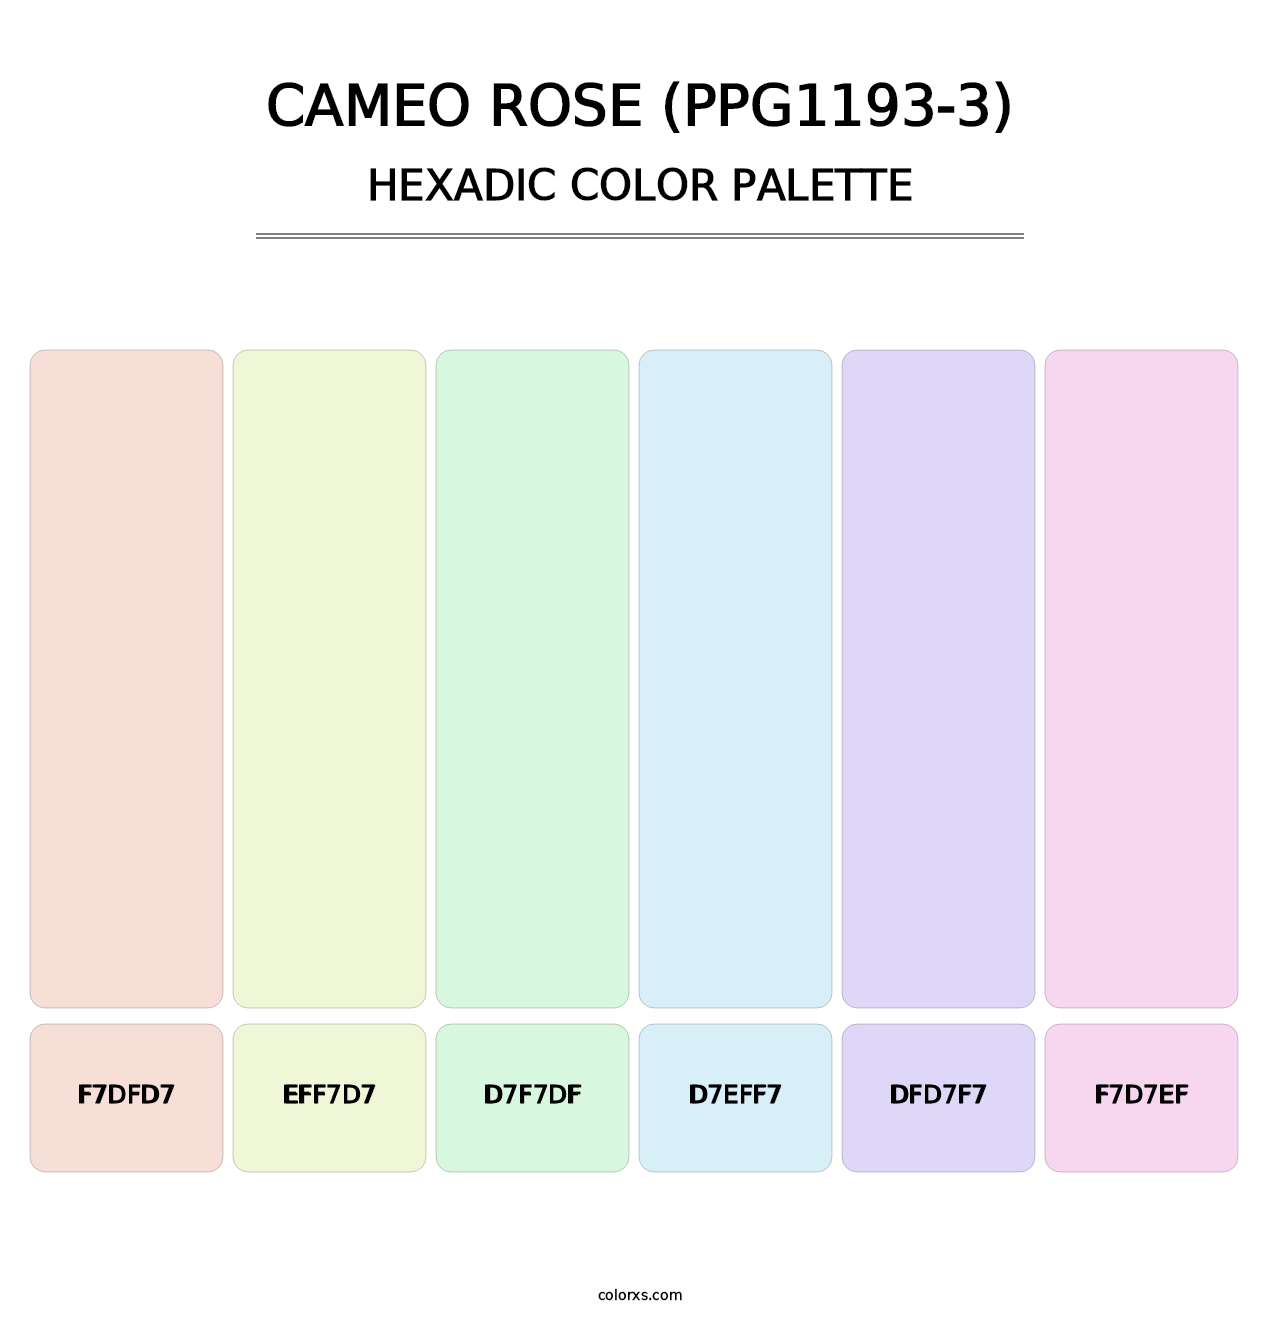 Cameo Rose (PPG1193-3) - Hexadic Color Palette